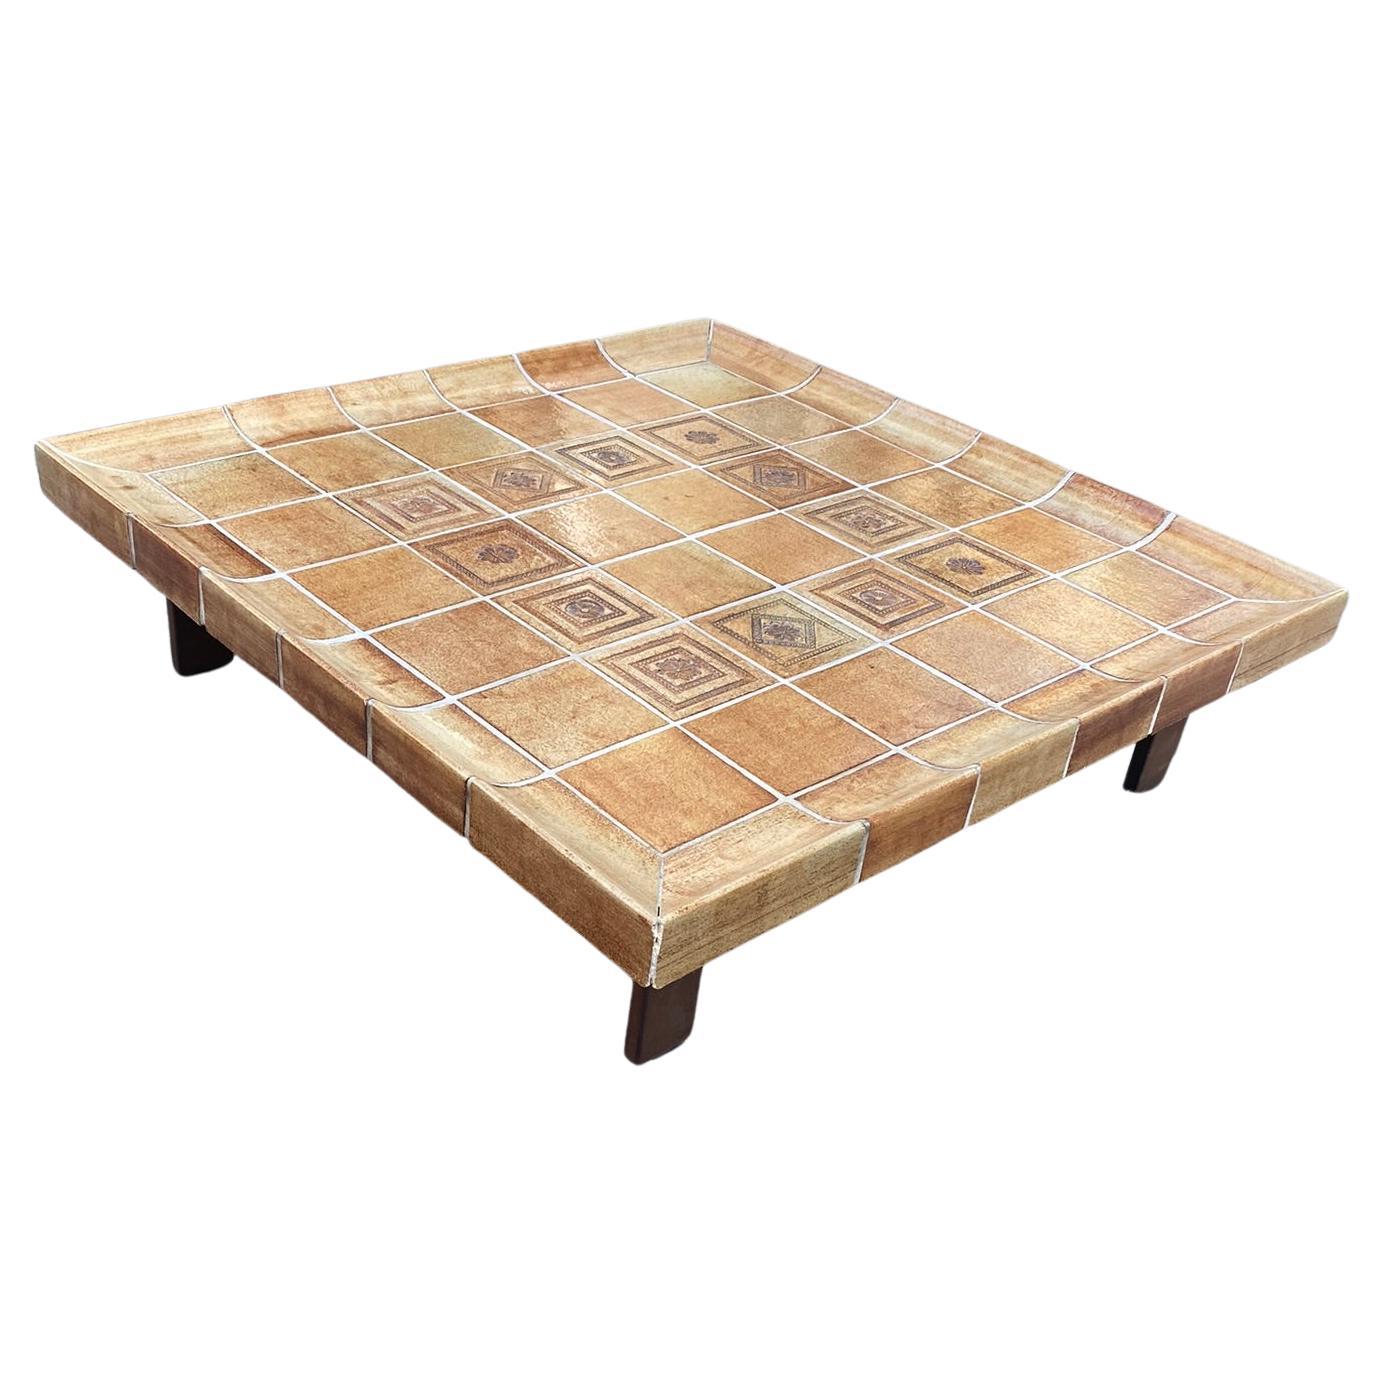 Roger Capron, Large Ceramic Coffee Table, Model "Cuvette" Vallauris, 1960 For Sale